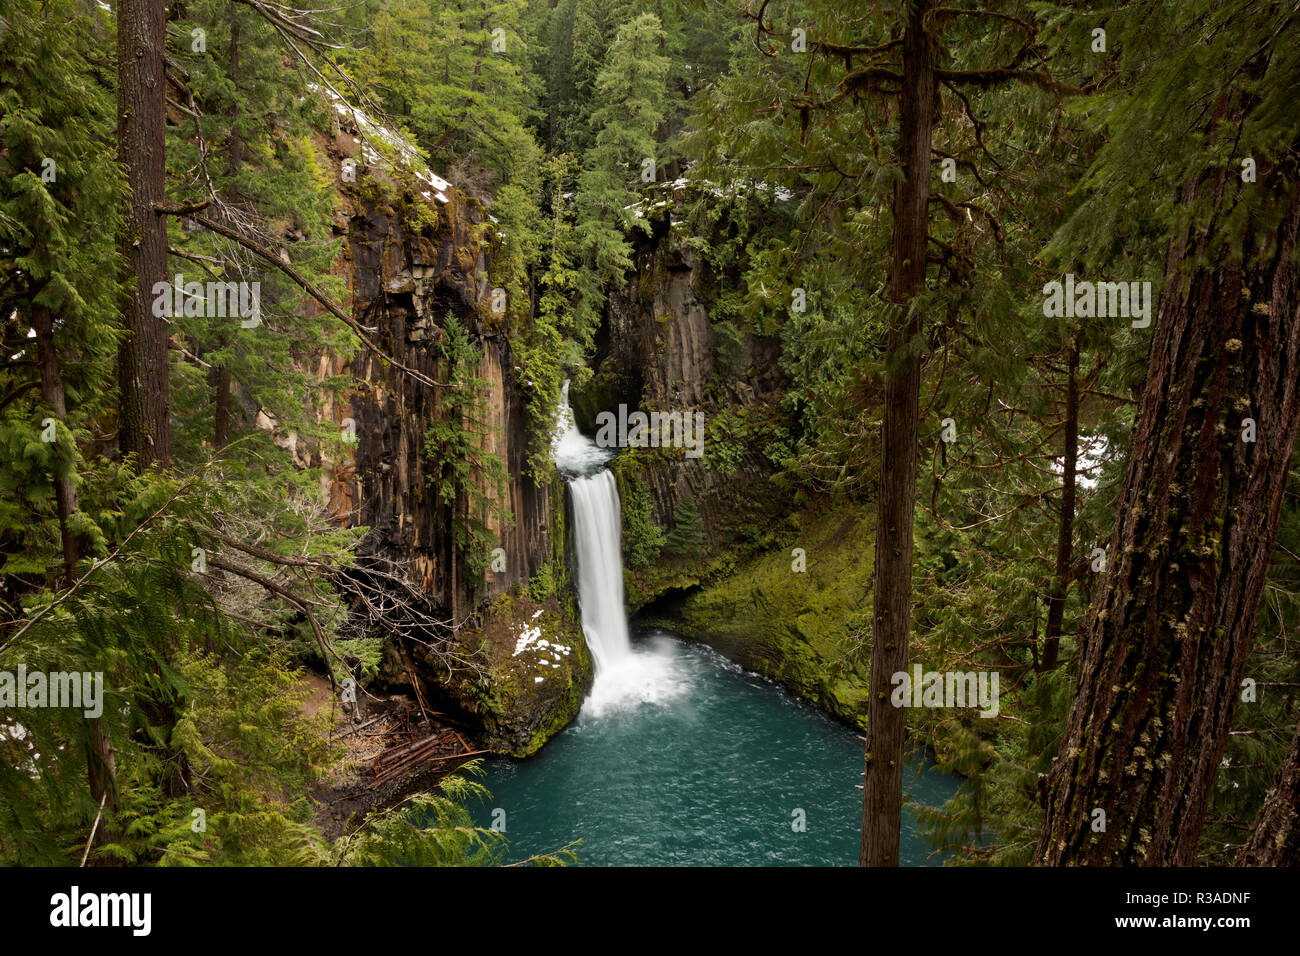 OR02458-00...OREGON - Toketee Falls surrounded by trees and columnar basalt on the Clearwater River in Umpqua National Forest. Stock Photo